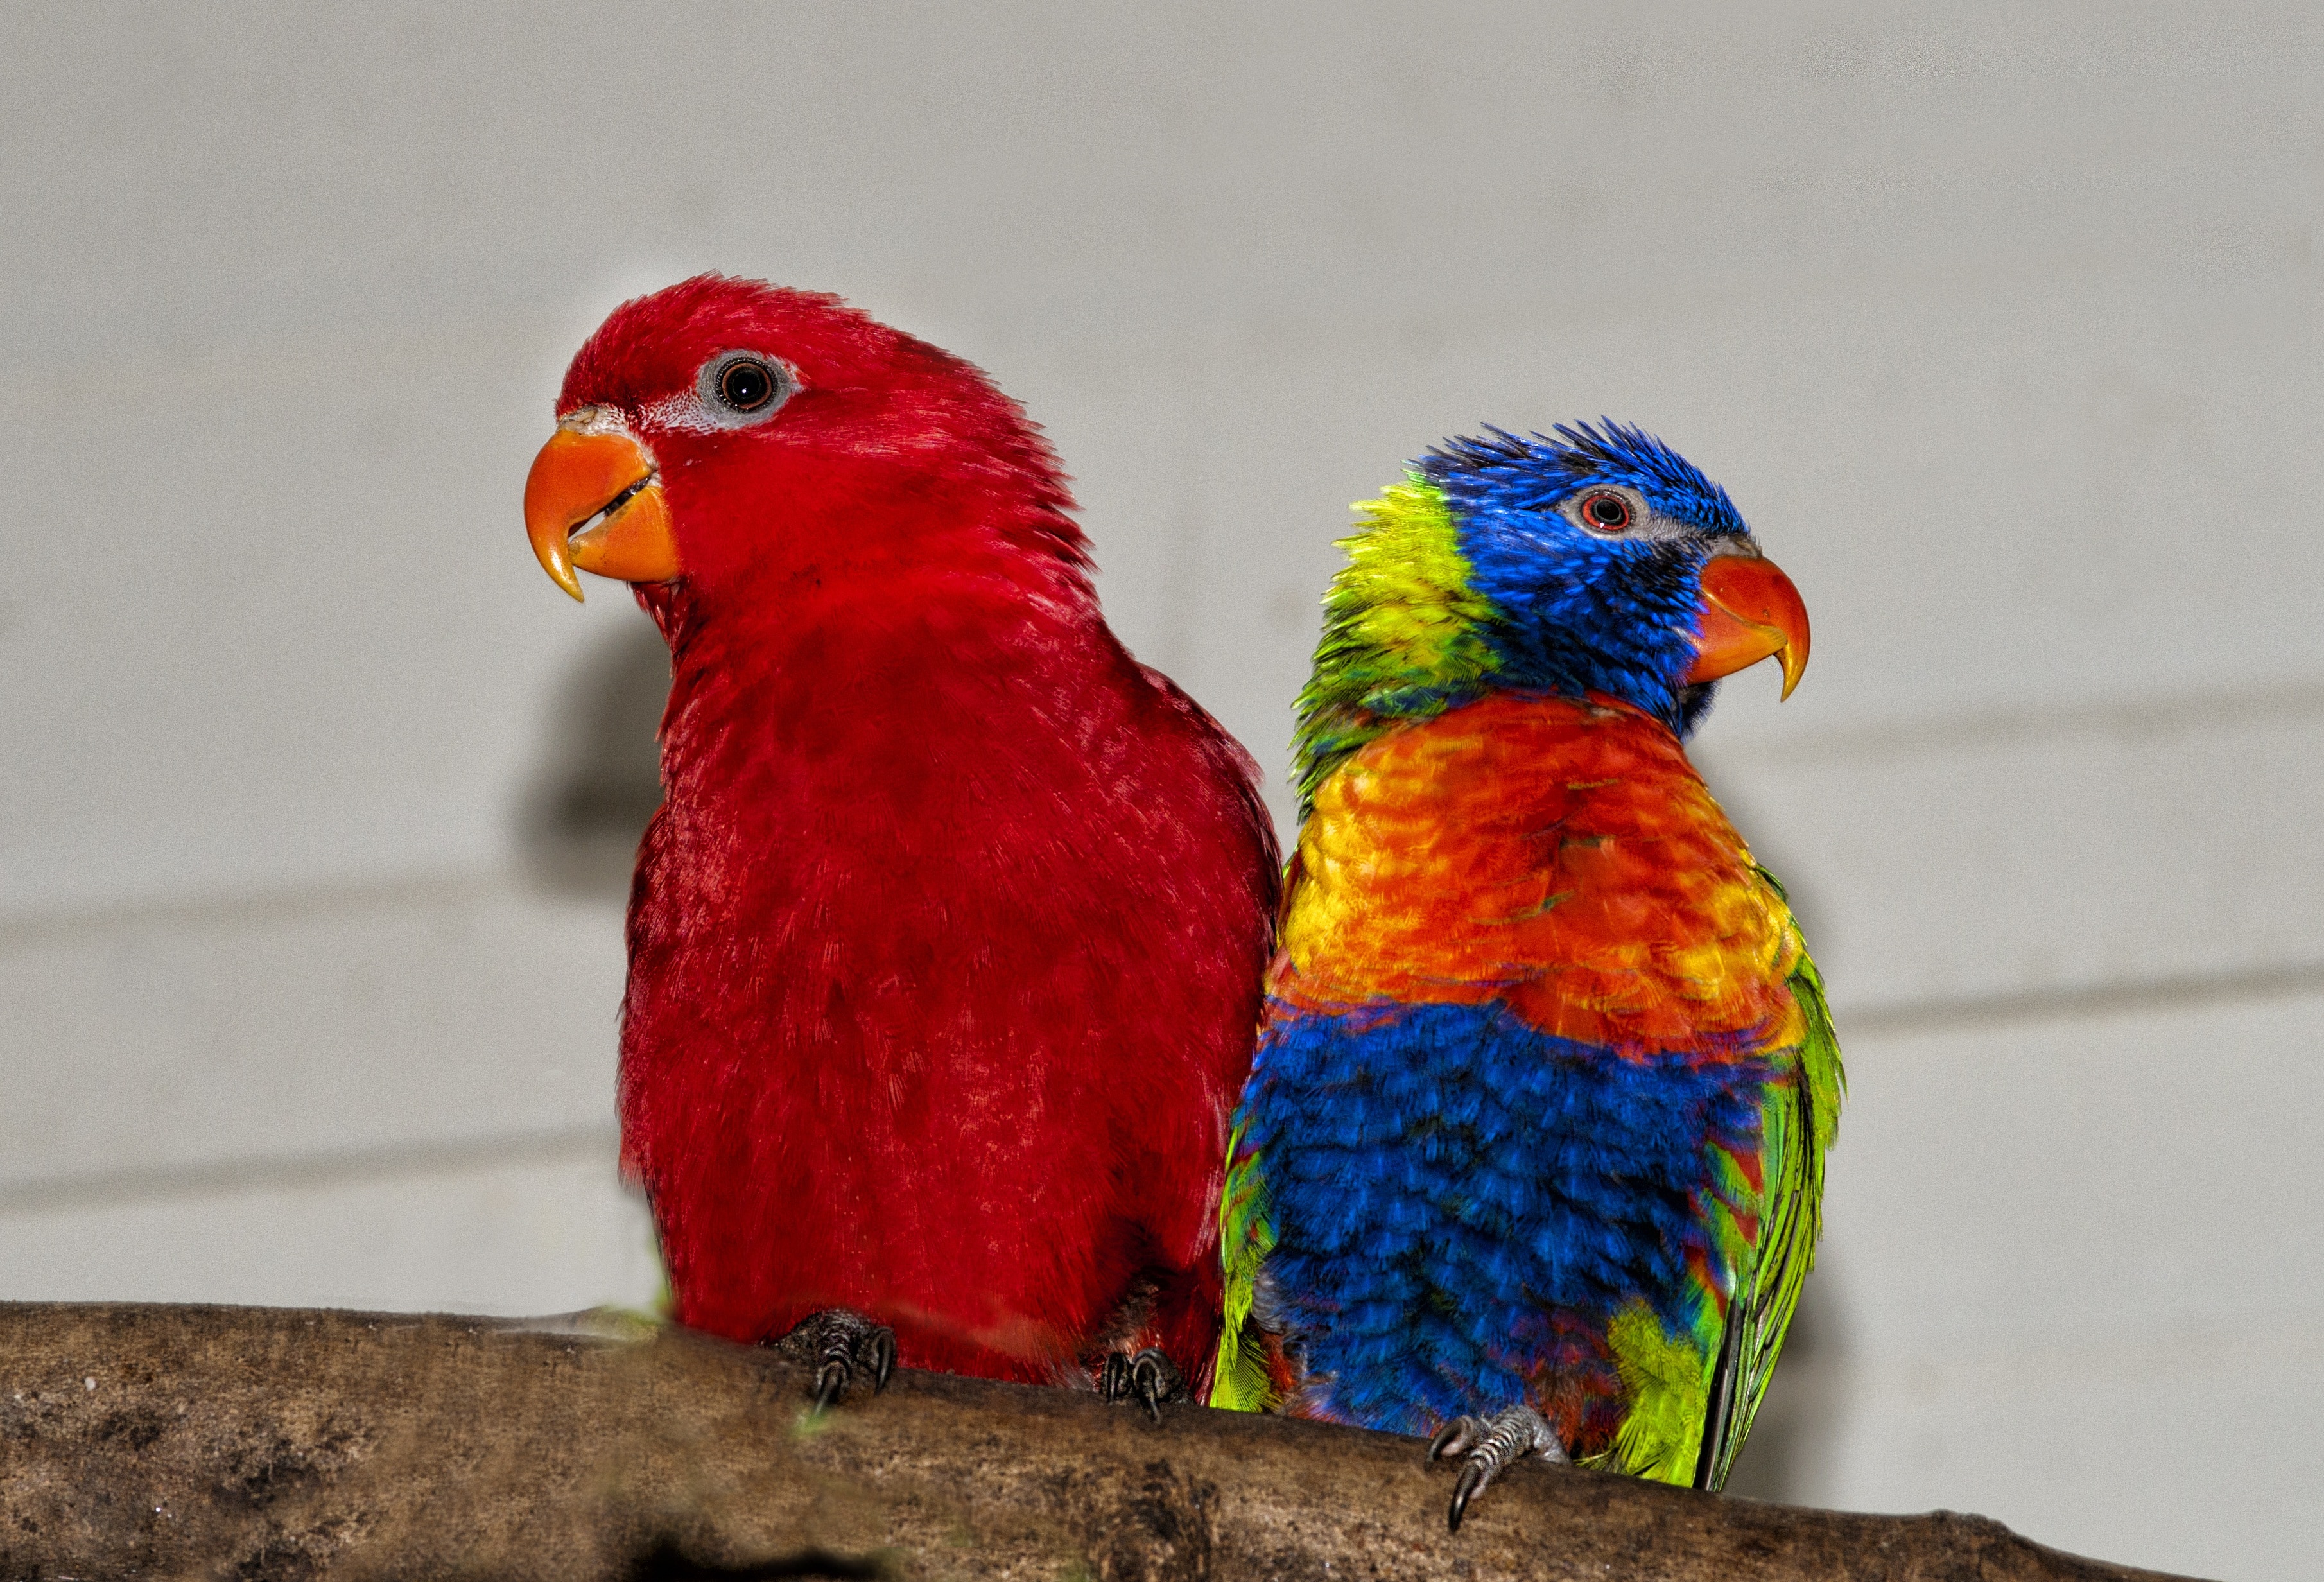 red and saving and orange parrot in brown wooden tree branch